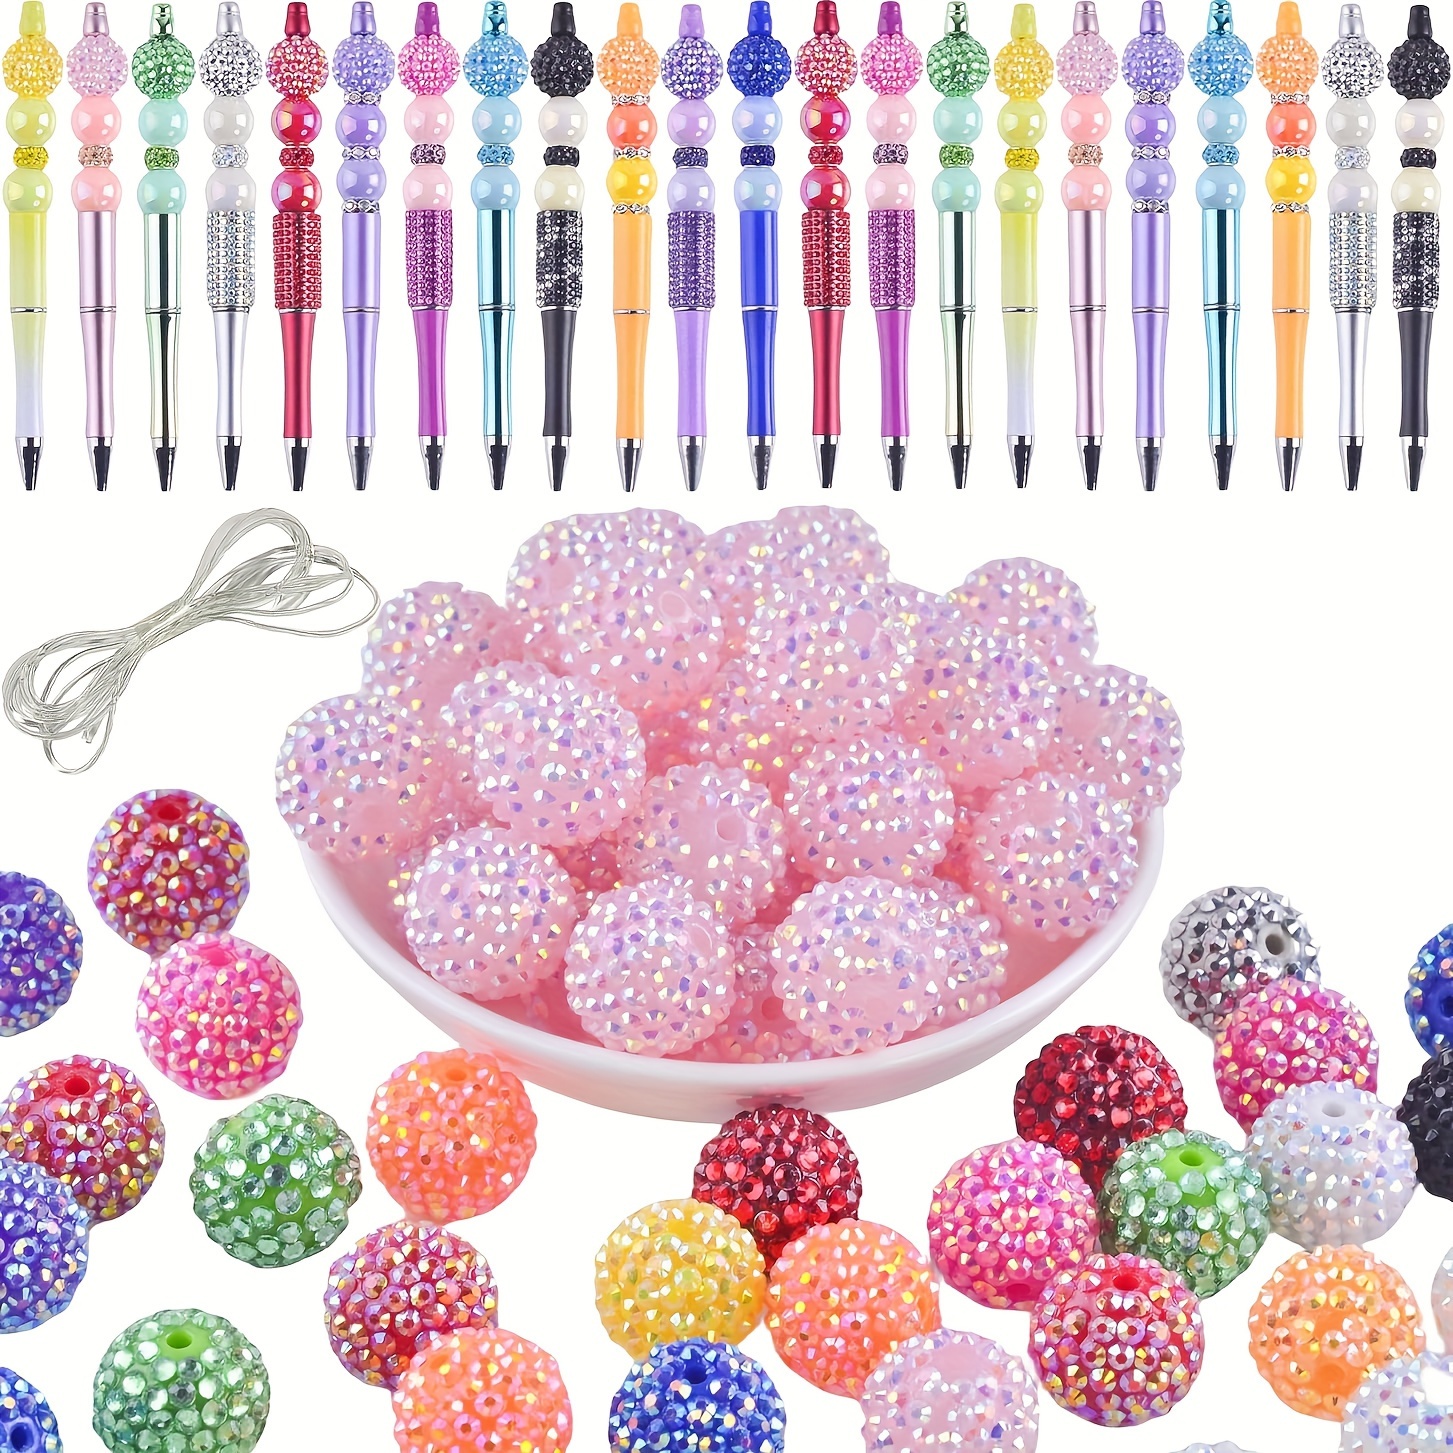 

chic" 12-piece 20mm Acrylic Beads With Rhinestones - Pink Ab Resin, Sugar Rainbow & Bubblegum Colors For Diy Pen Decorations And Keychain Crafting